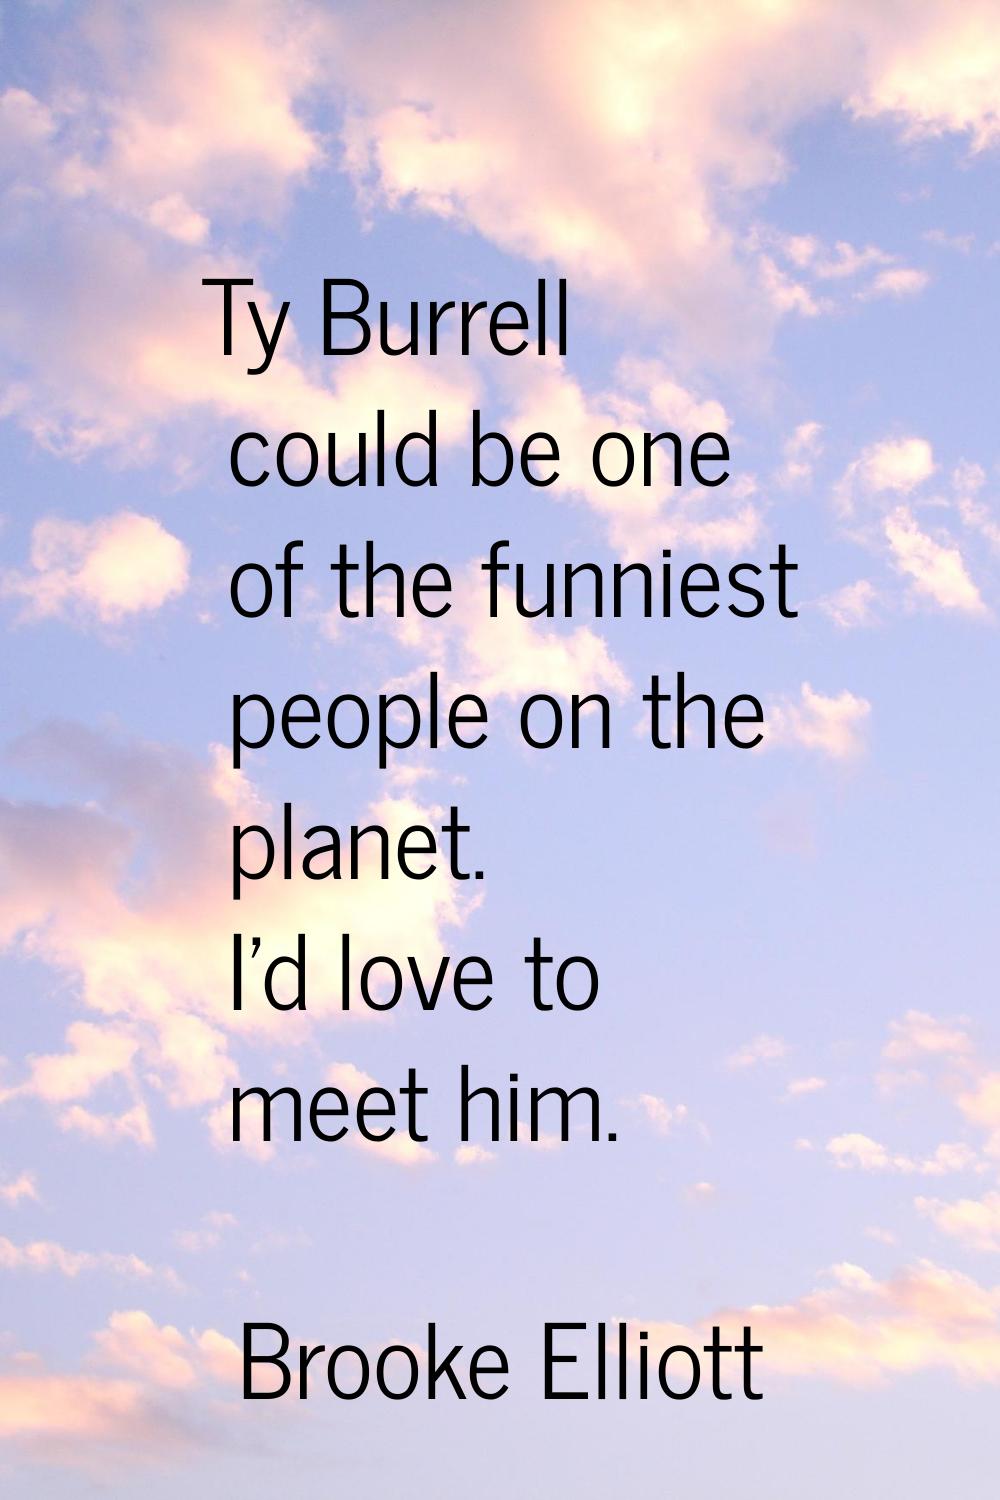 Ty Burrell could be one of the funniest people on the planet. I'd love to meet him.